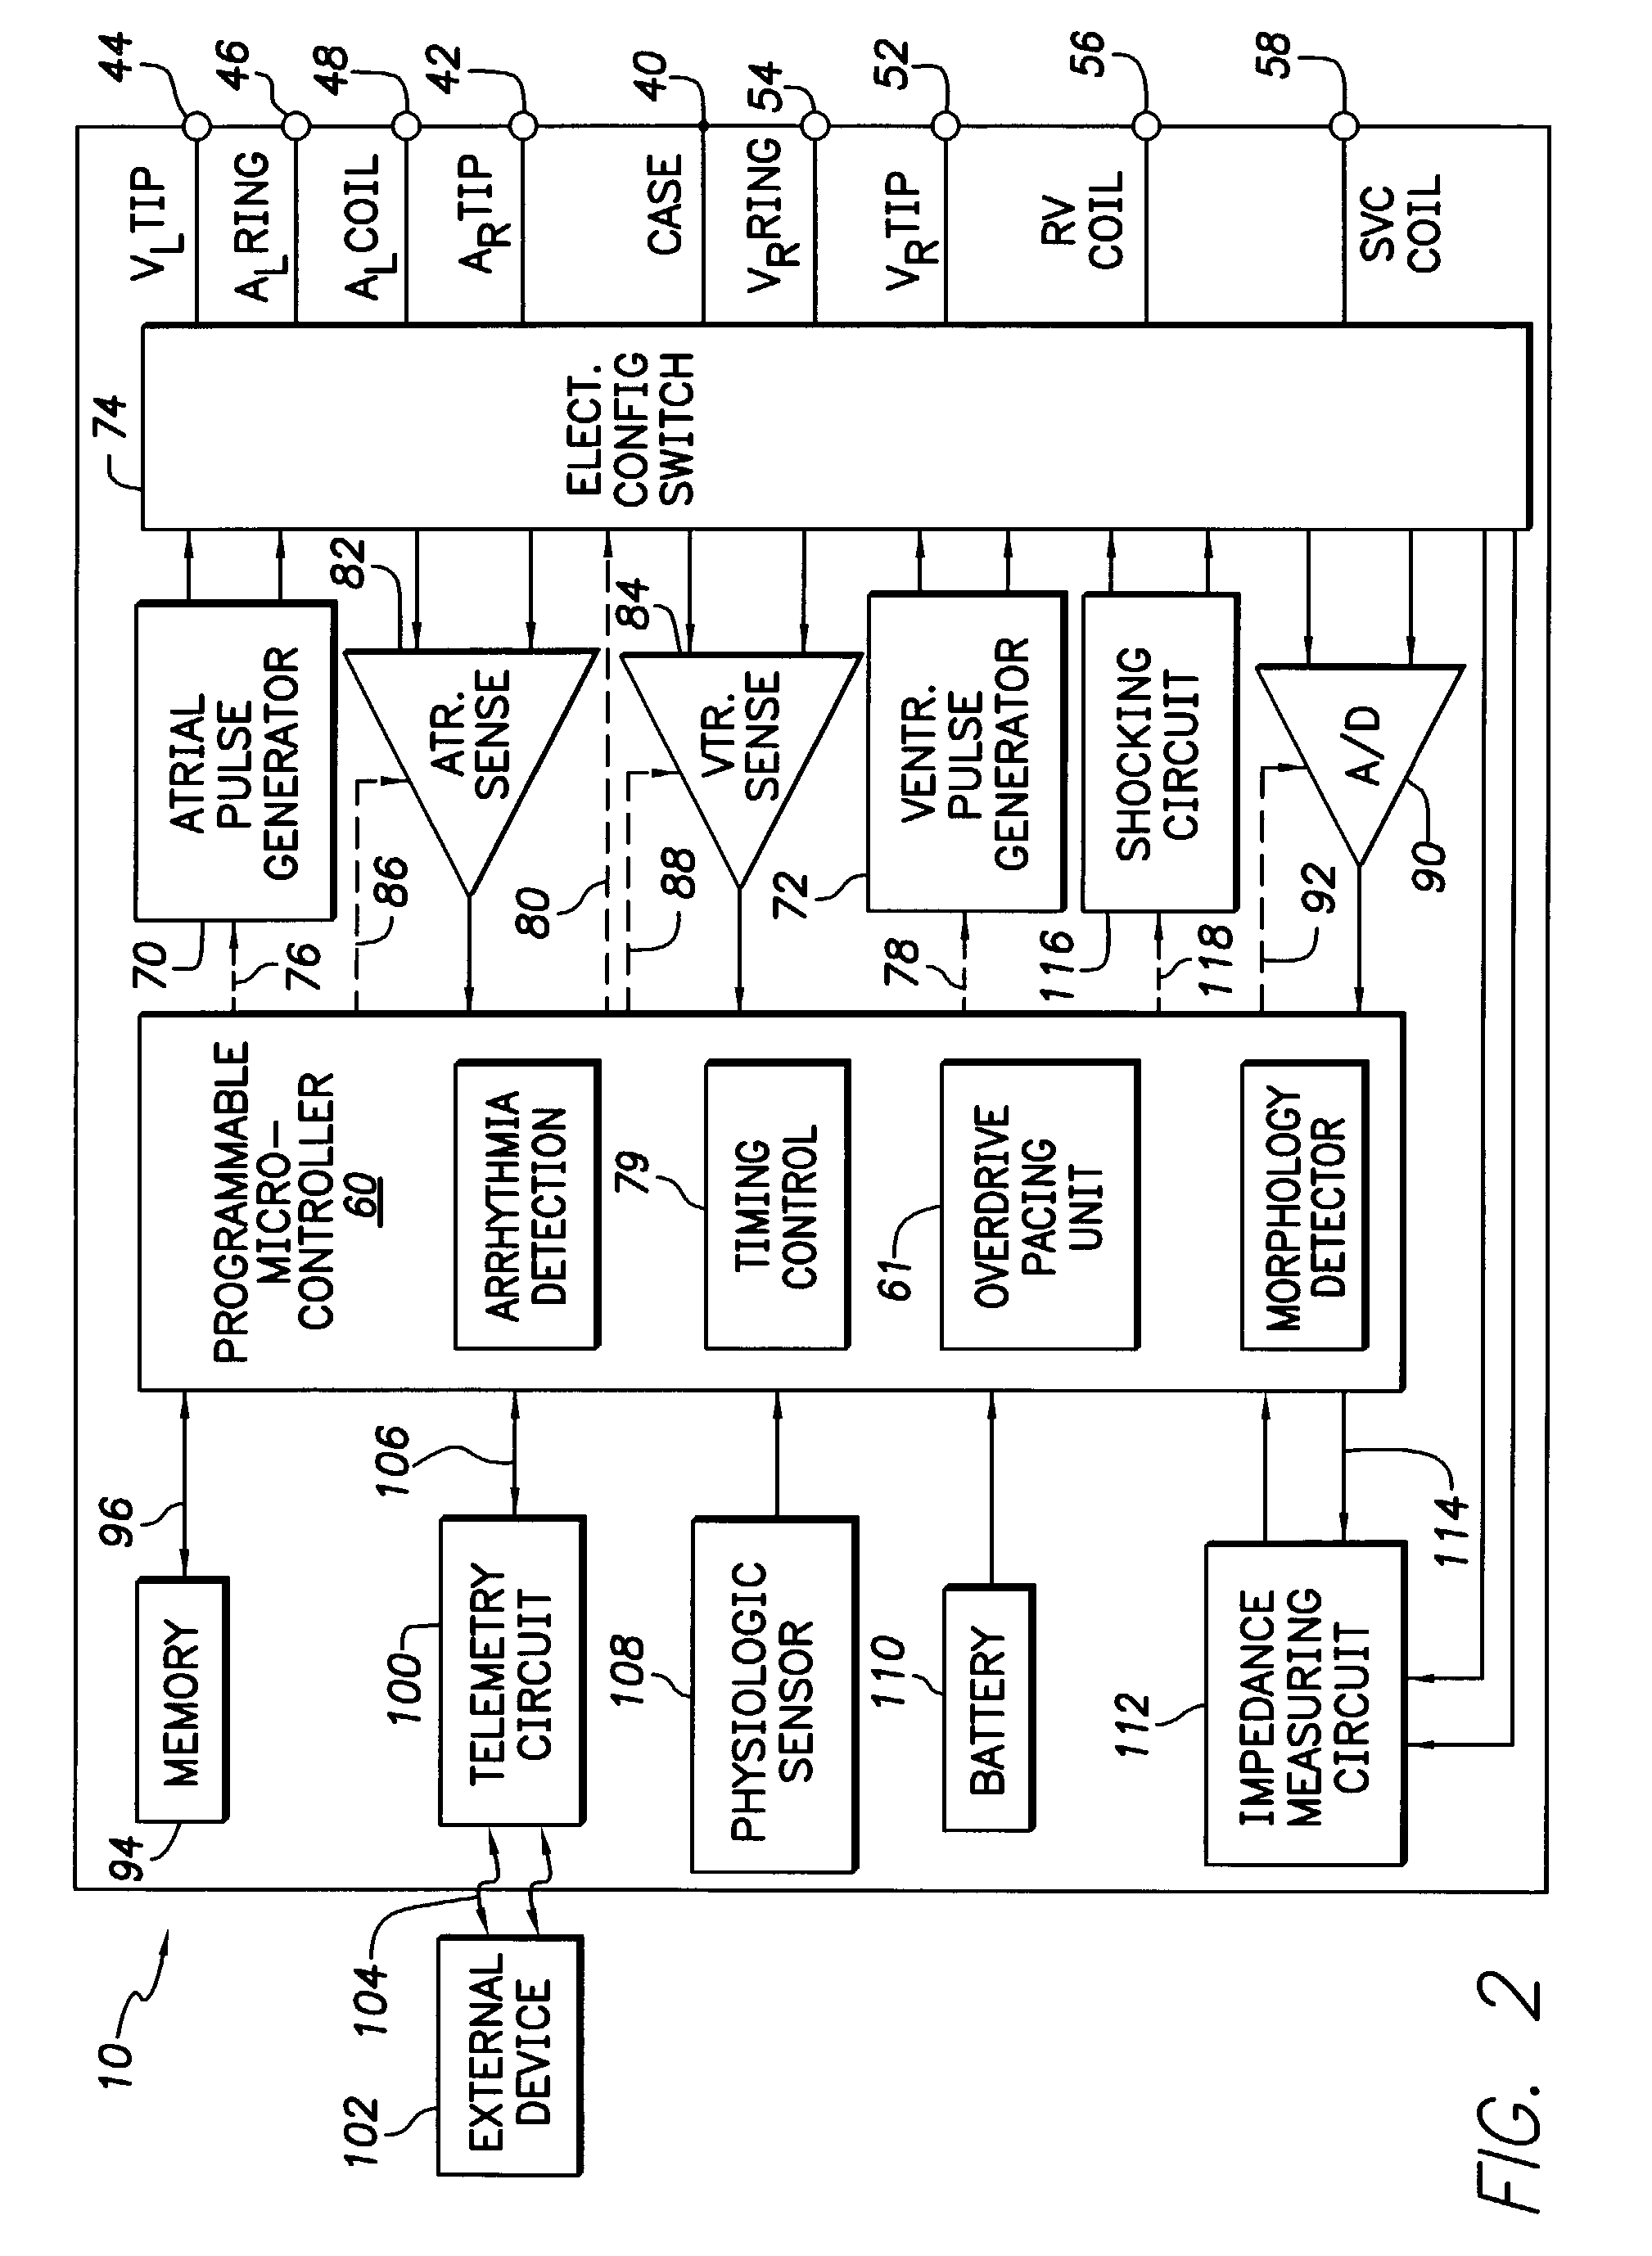 Method and apparatus for providing atrial autocapture in a dynamic atrial overdrive pacing system for use in an implantable cardiac stimulation device